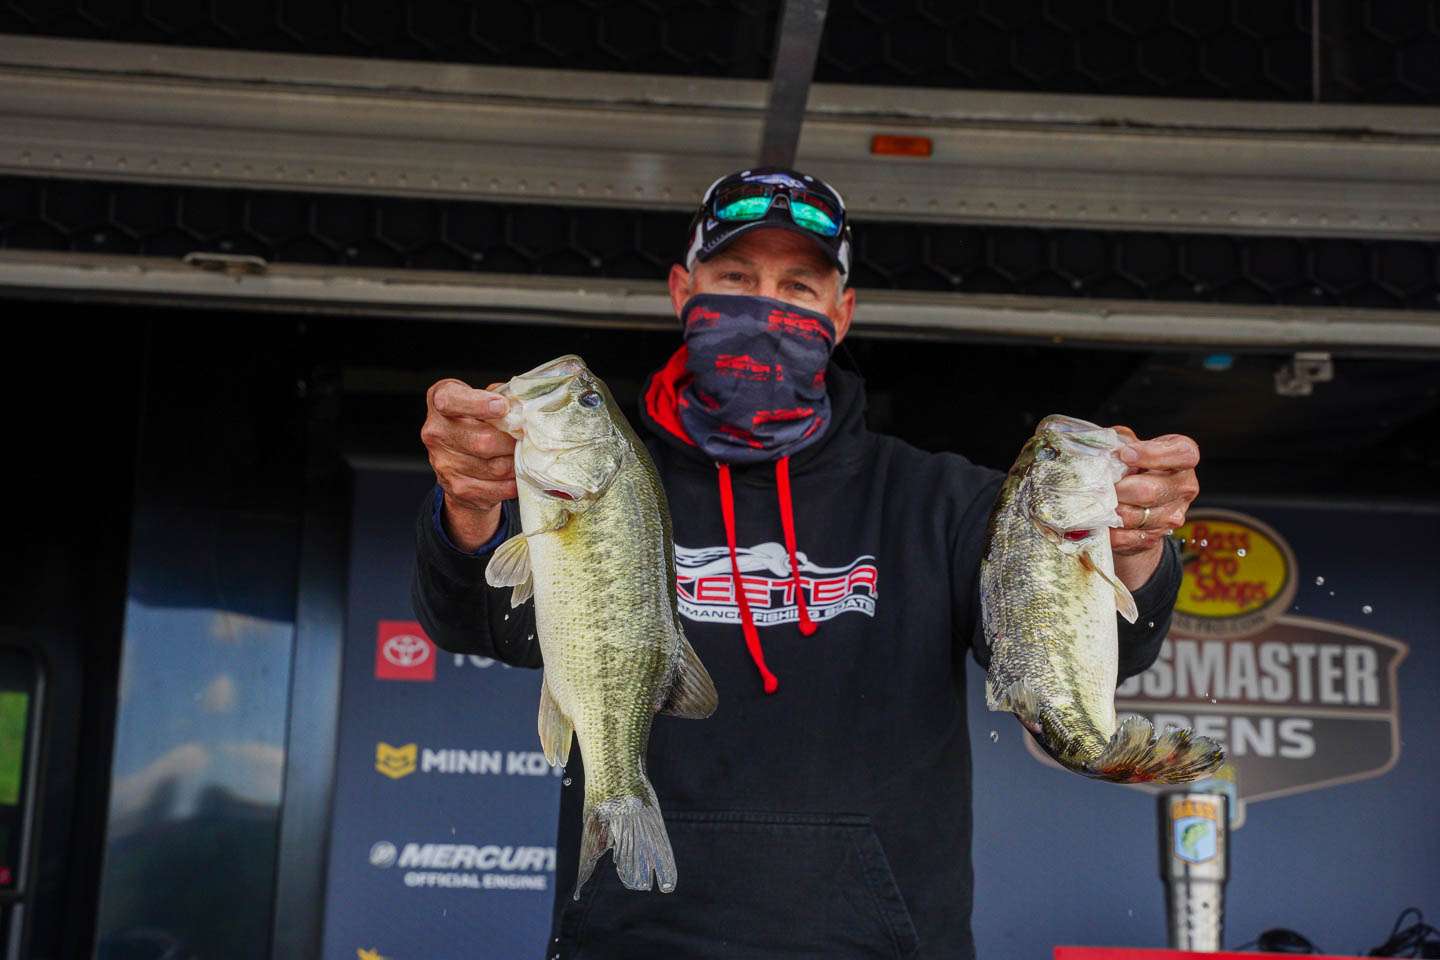 Jeff Norris, co-angler (8th, 7 - 13)